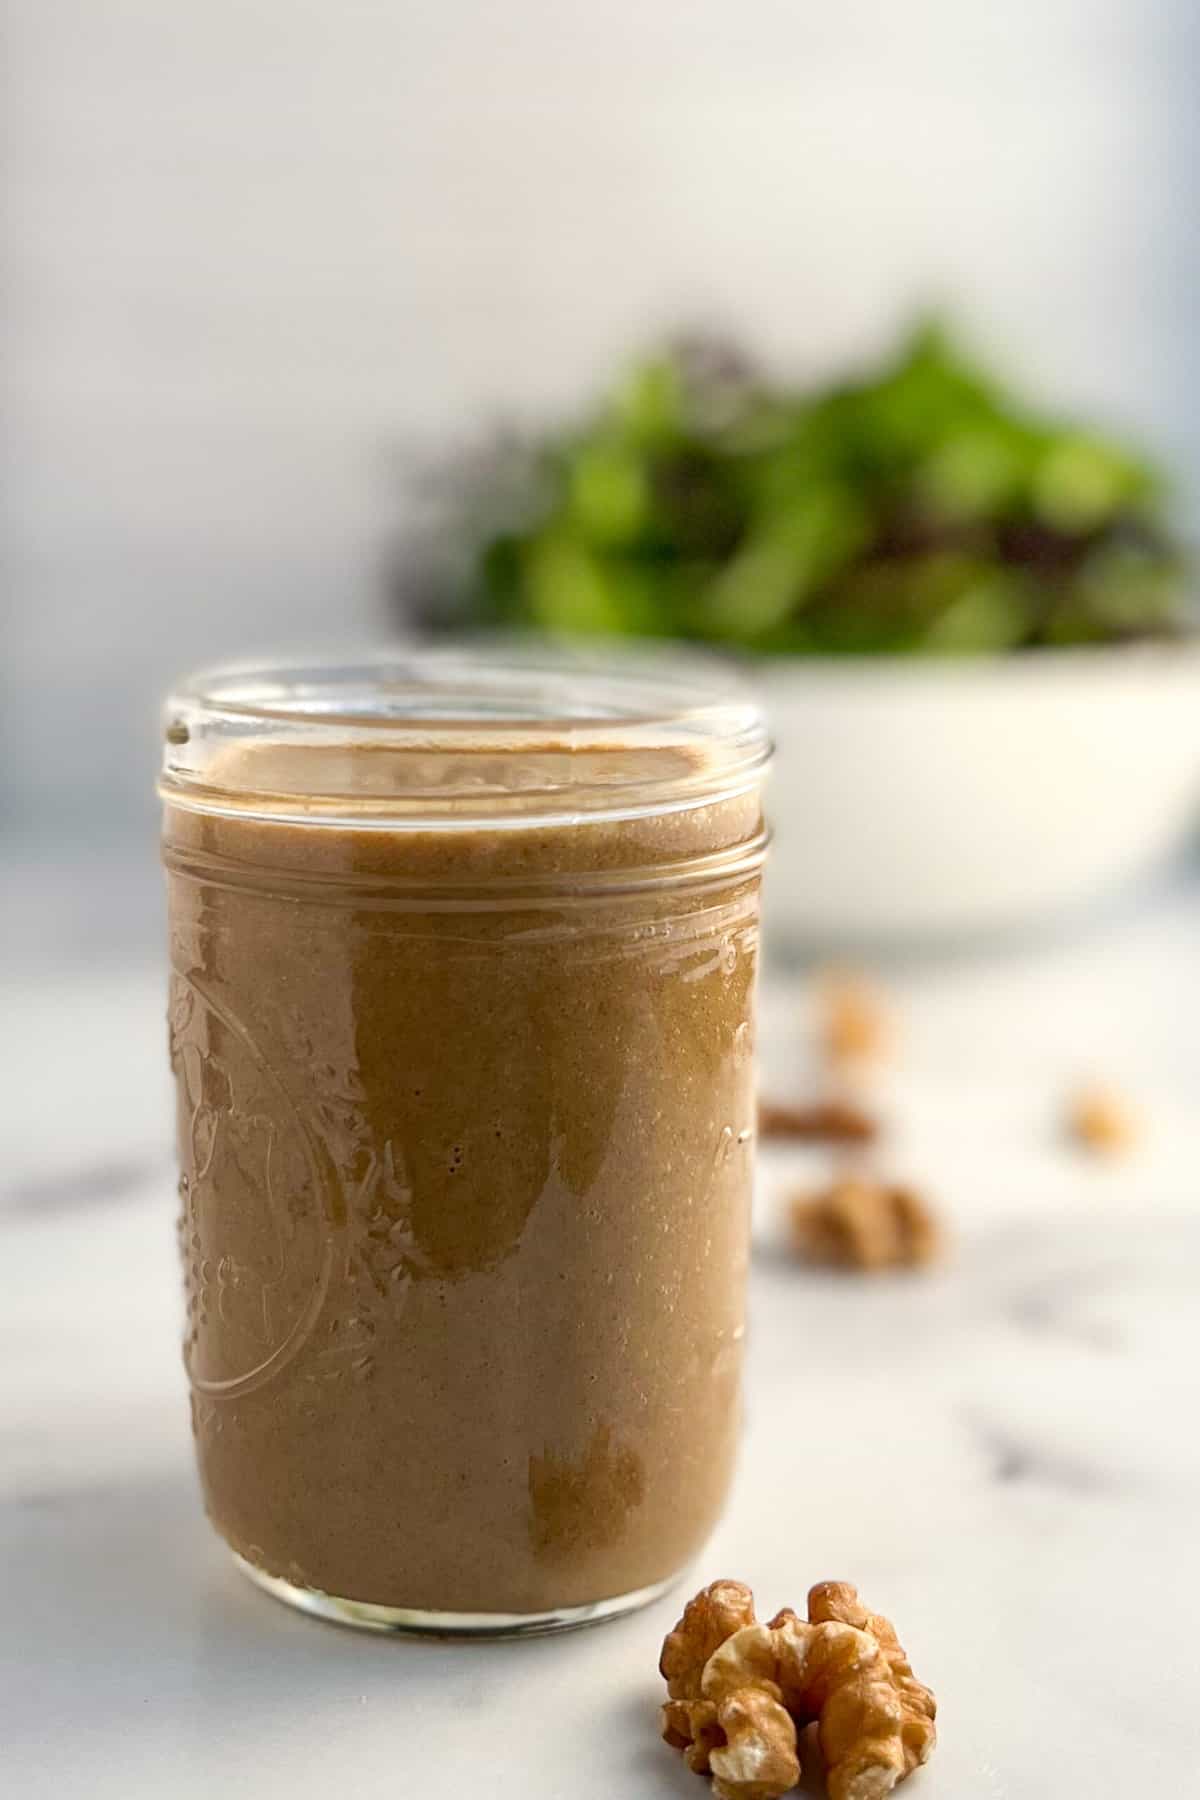 side view close up of walnuts salad dressing in a glass mason jar with loose walnuts and salad greens blurred in the background